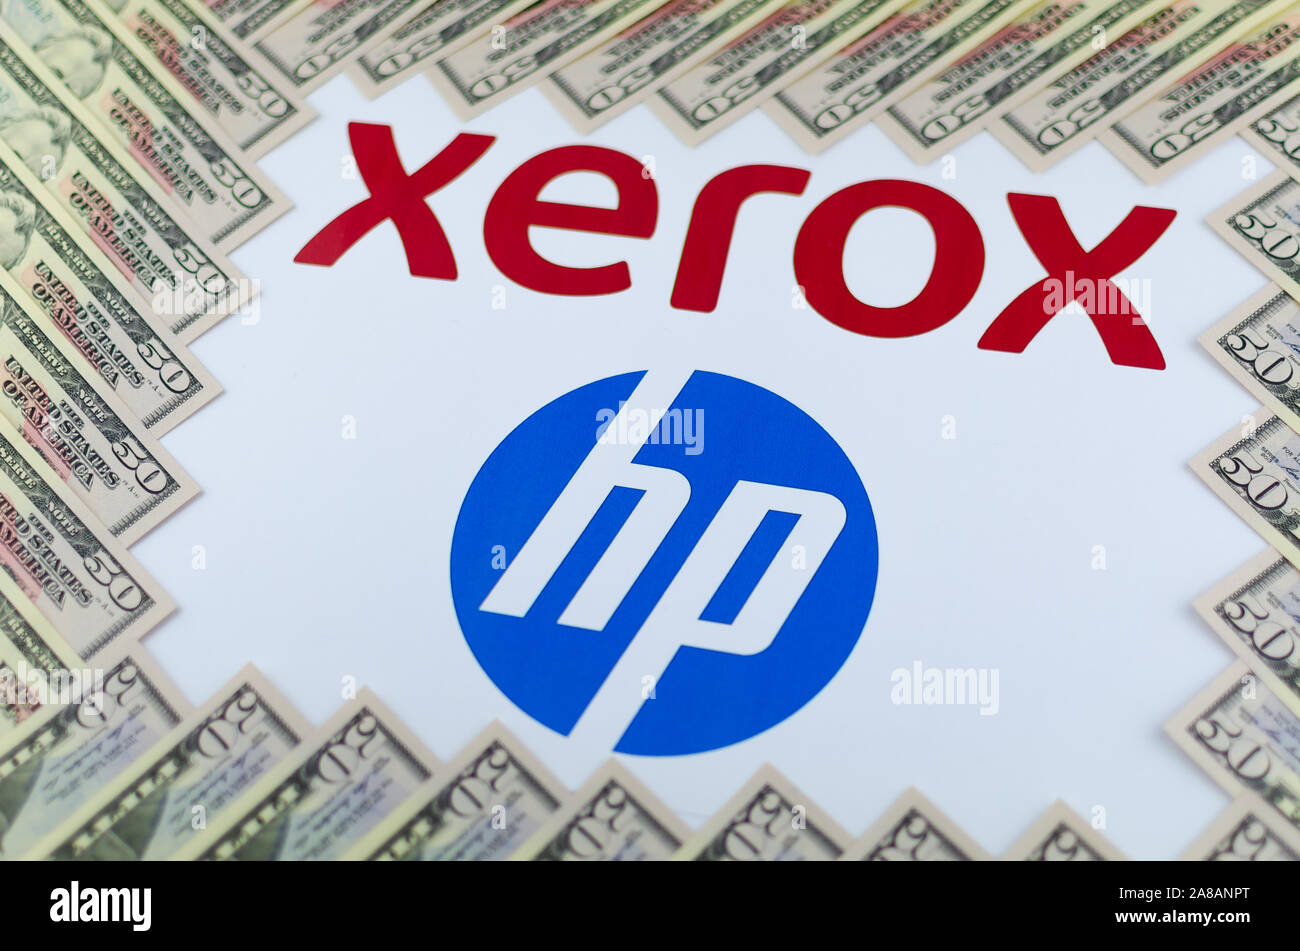 XEROX and HP logos seen on the paper brochure and dollar bills around. Concept image for the news about XEROX bid to buy HP. Stock Photo